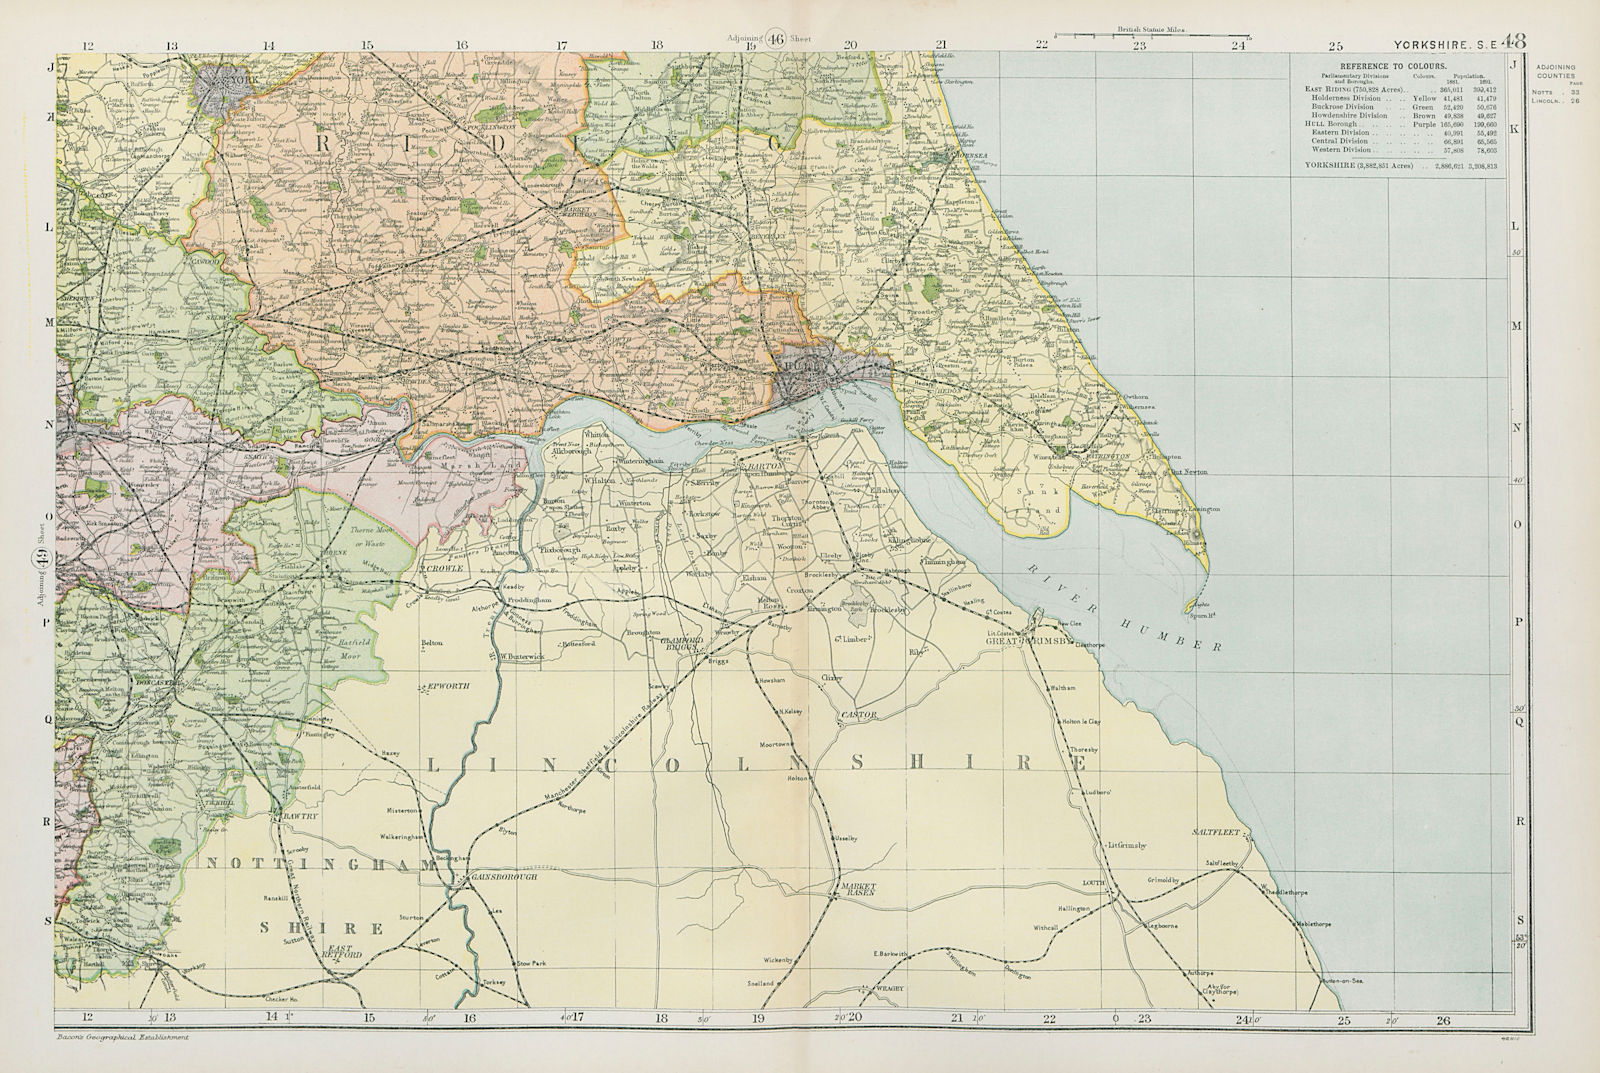 HUMBER ESTUARY.Yorkshire South East.Shows Parliamentary divisions.BACON 1900 map